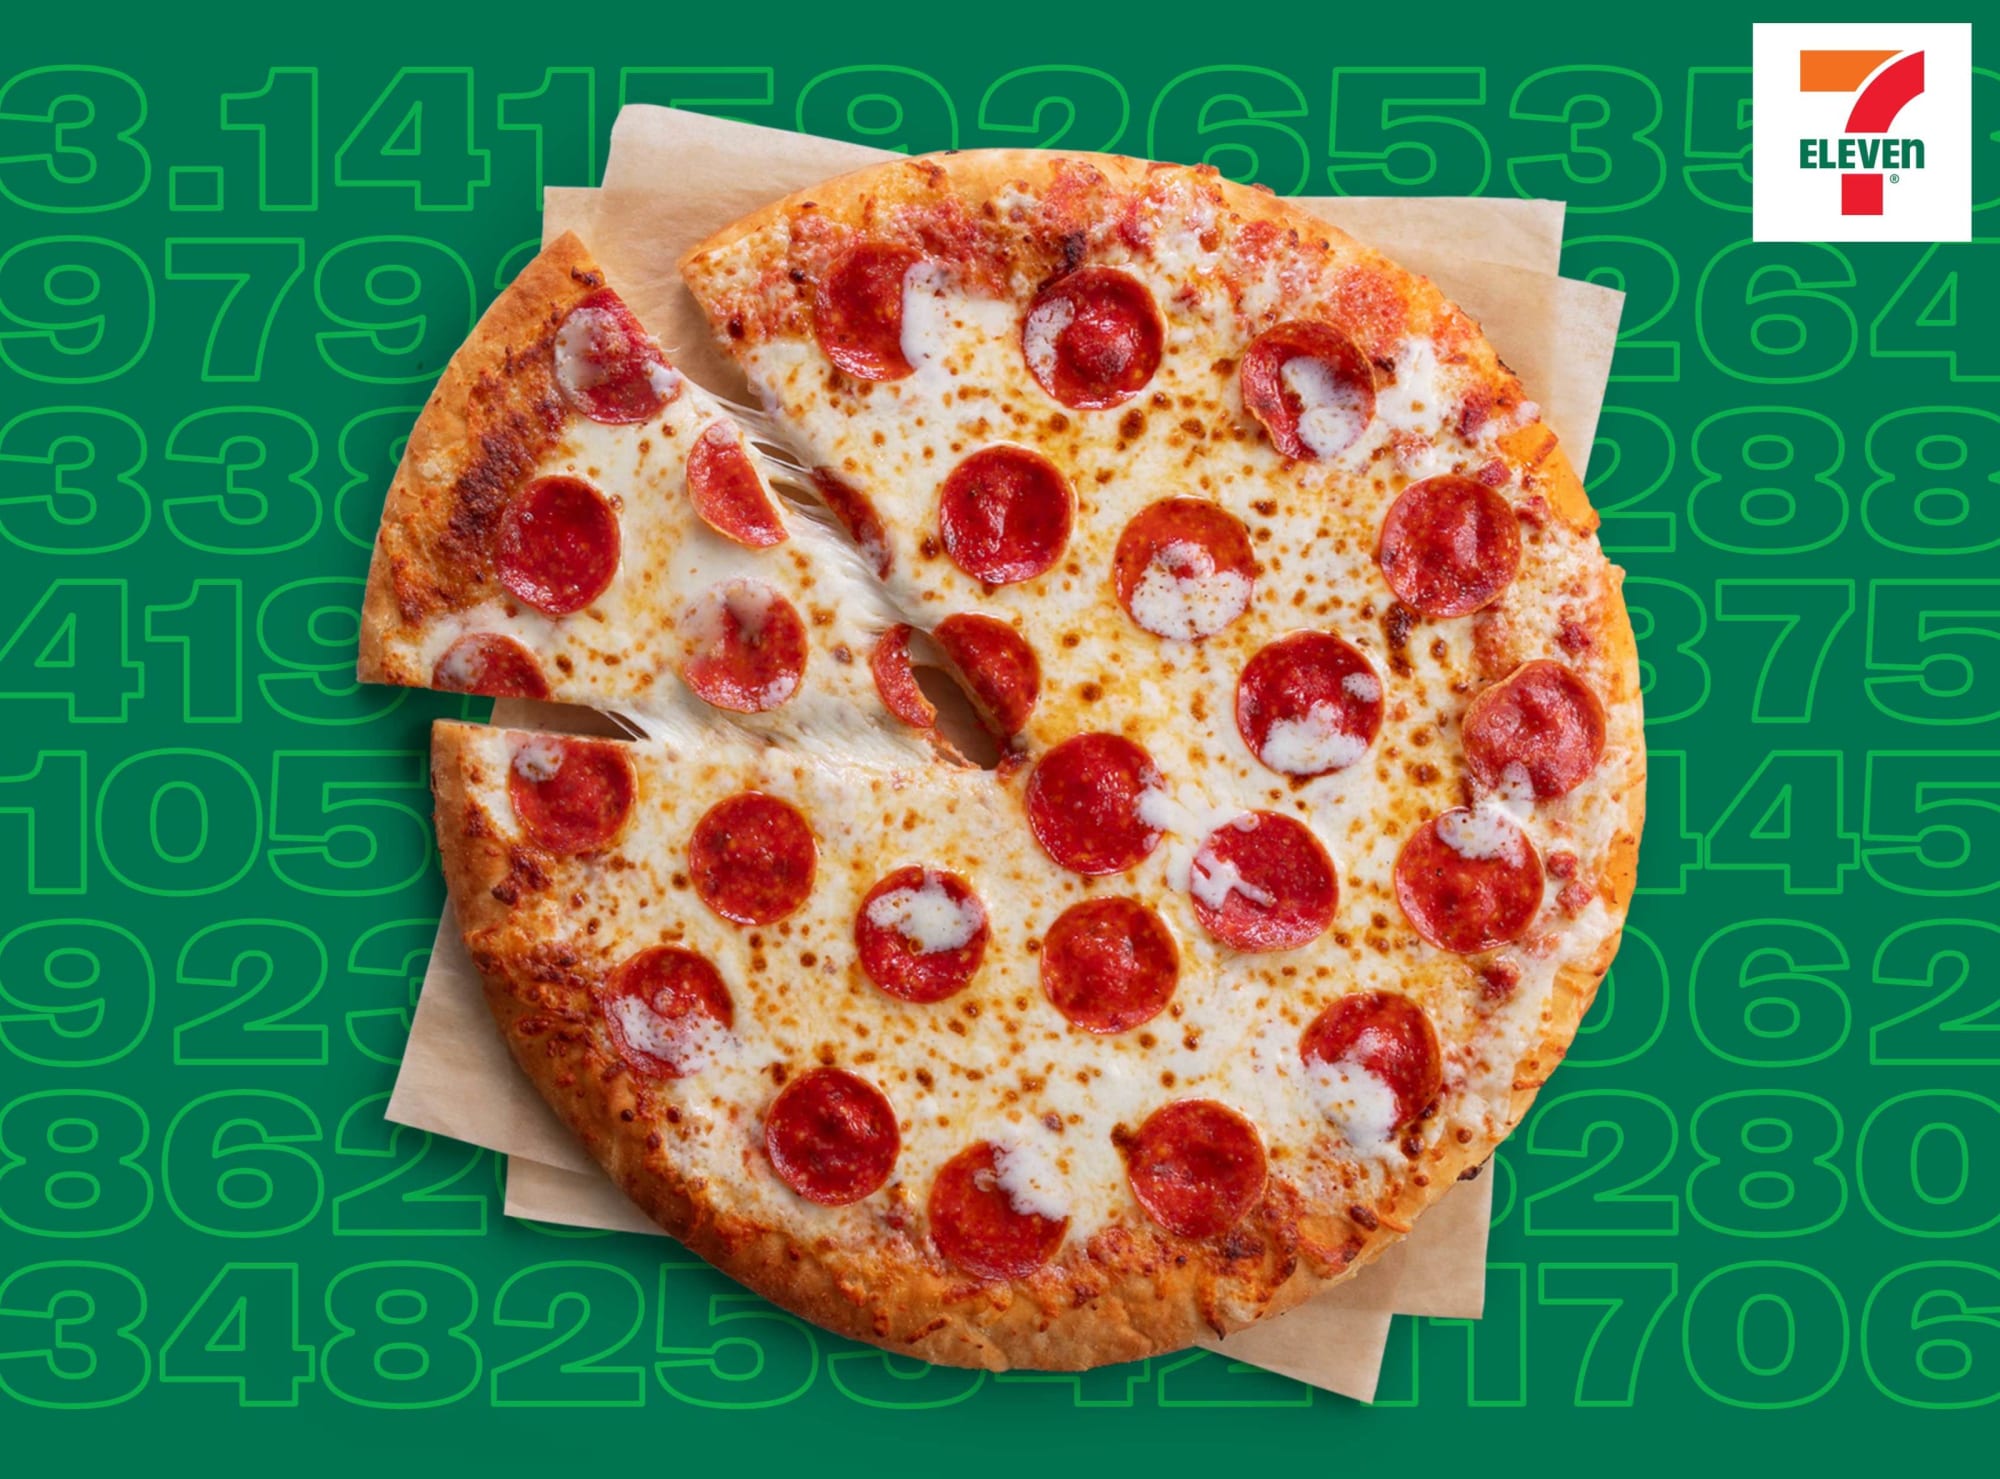 7Eleven Celebrate National Pepperoni Pizza Day with a deal